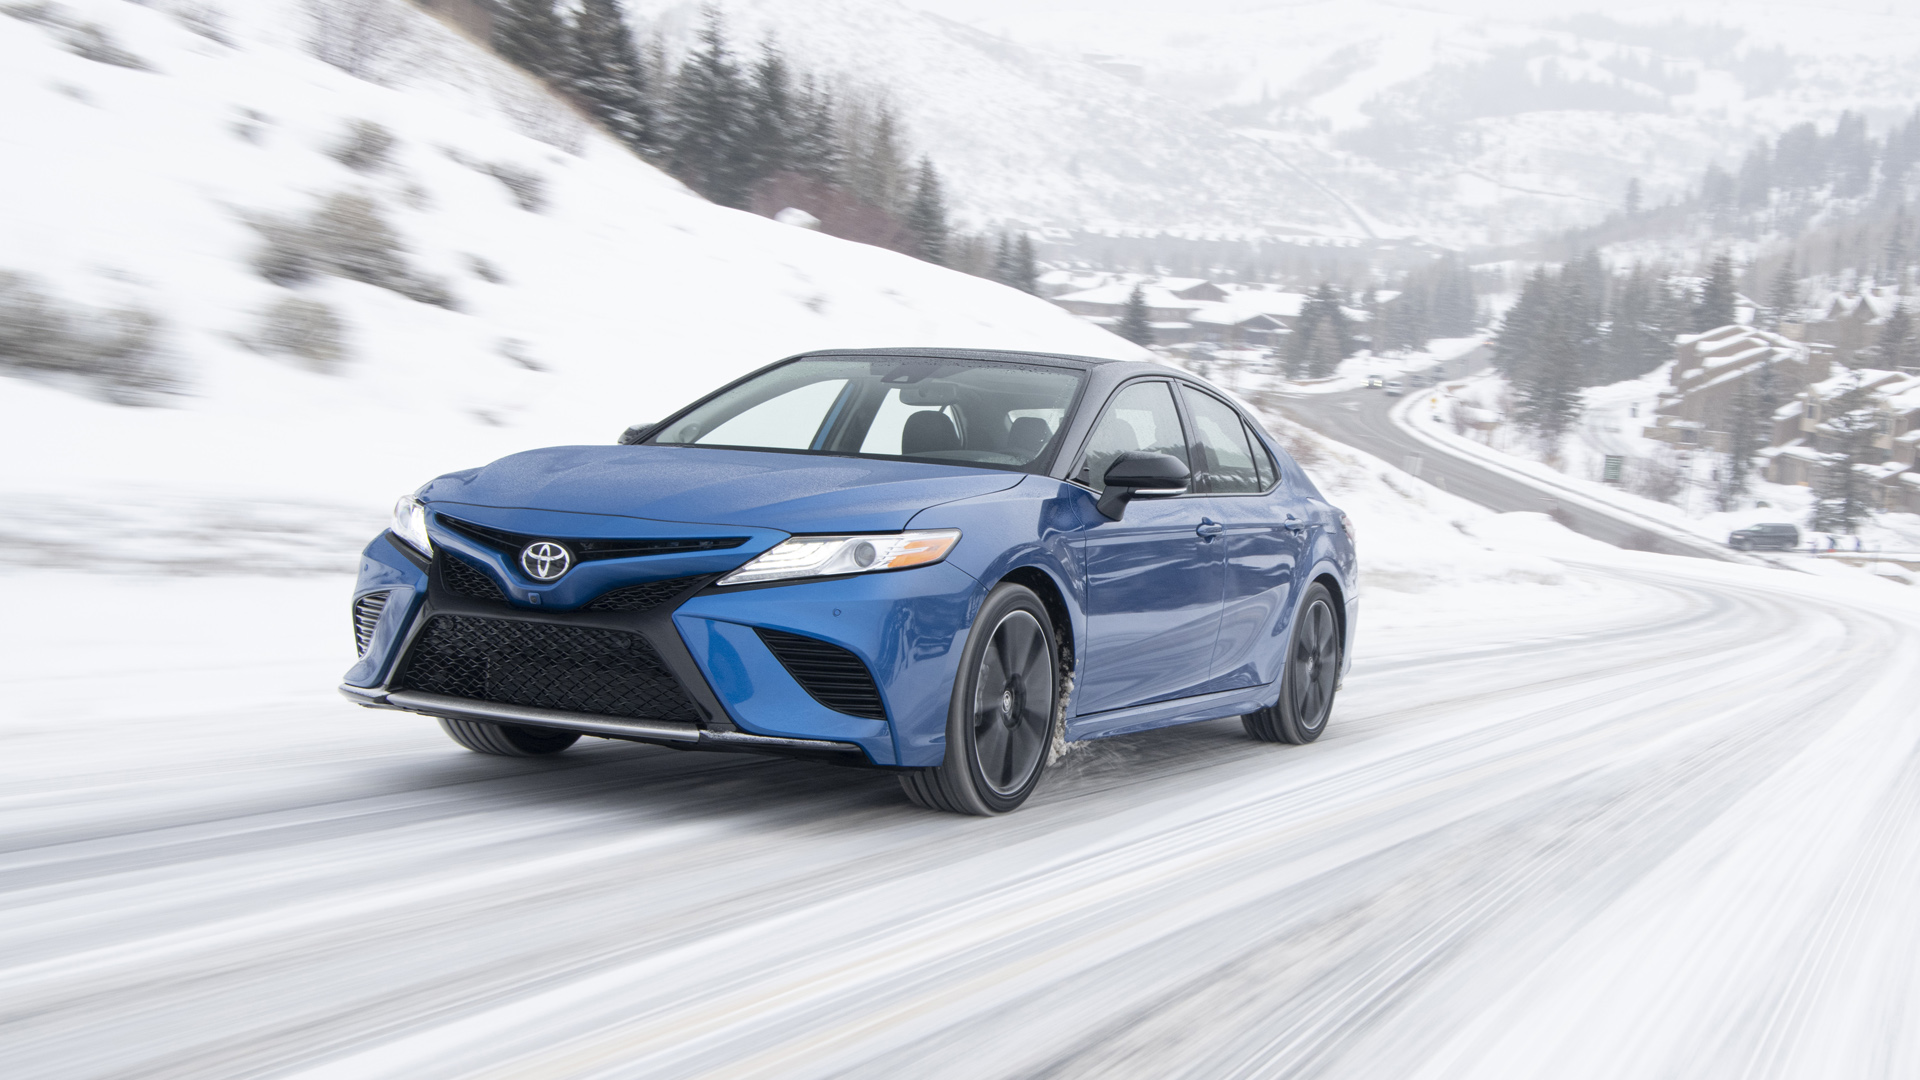 2020 Toyota Camry AWD First Drive What's new, allwheel drive, fuel